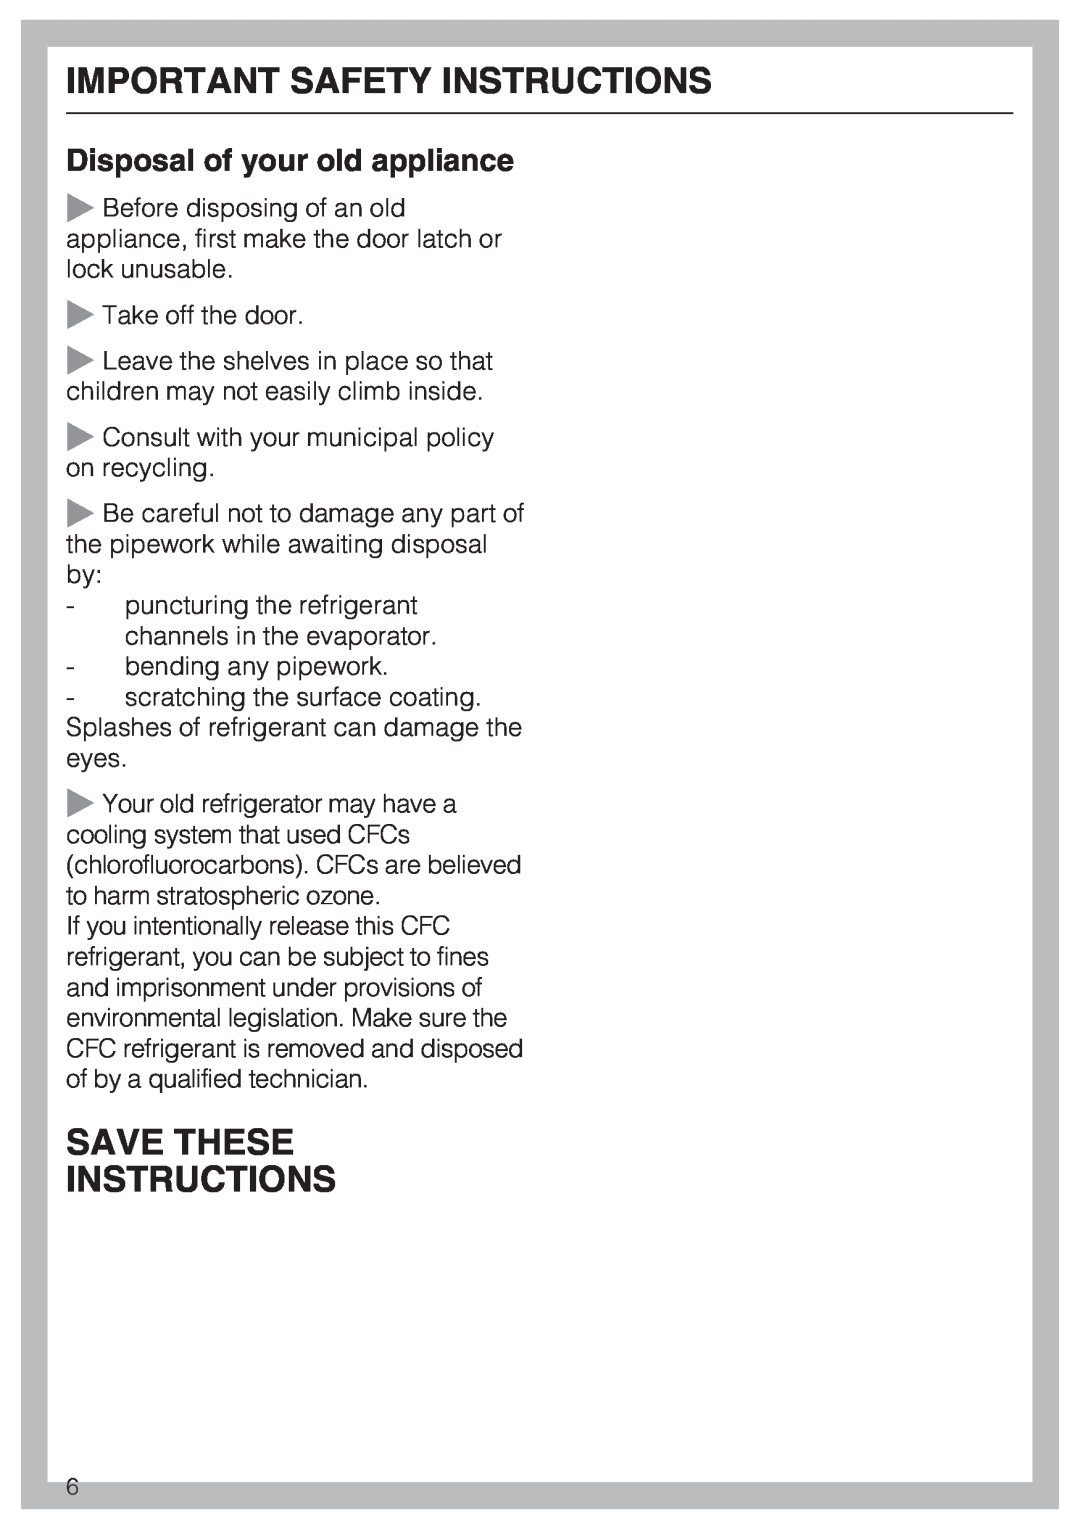 Miele KWT1611SF, KWT1601SF Save These Instructions, Disposal of your old appliance, Important Safety Instructions 